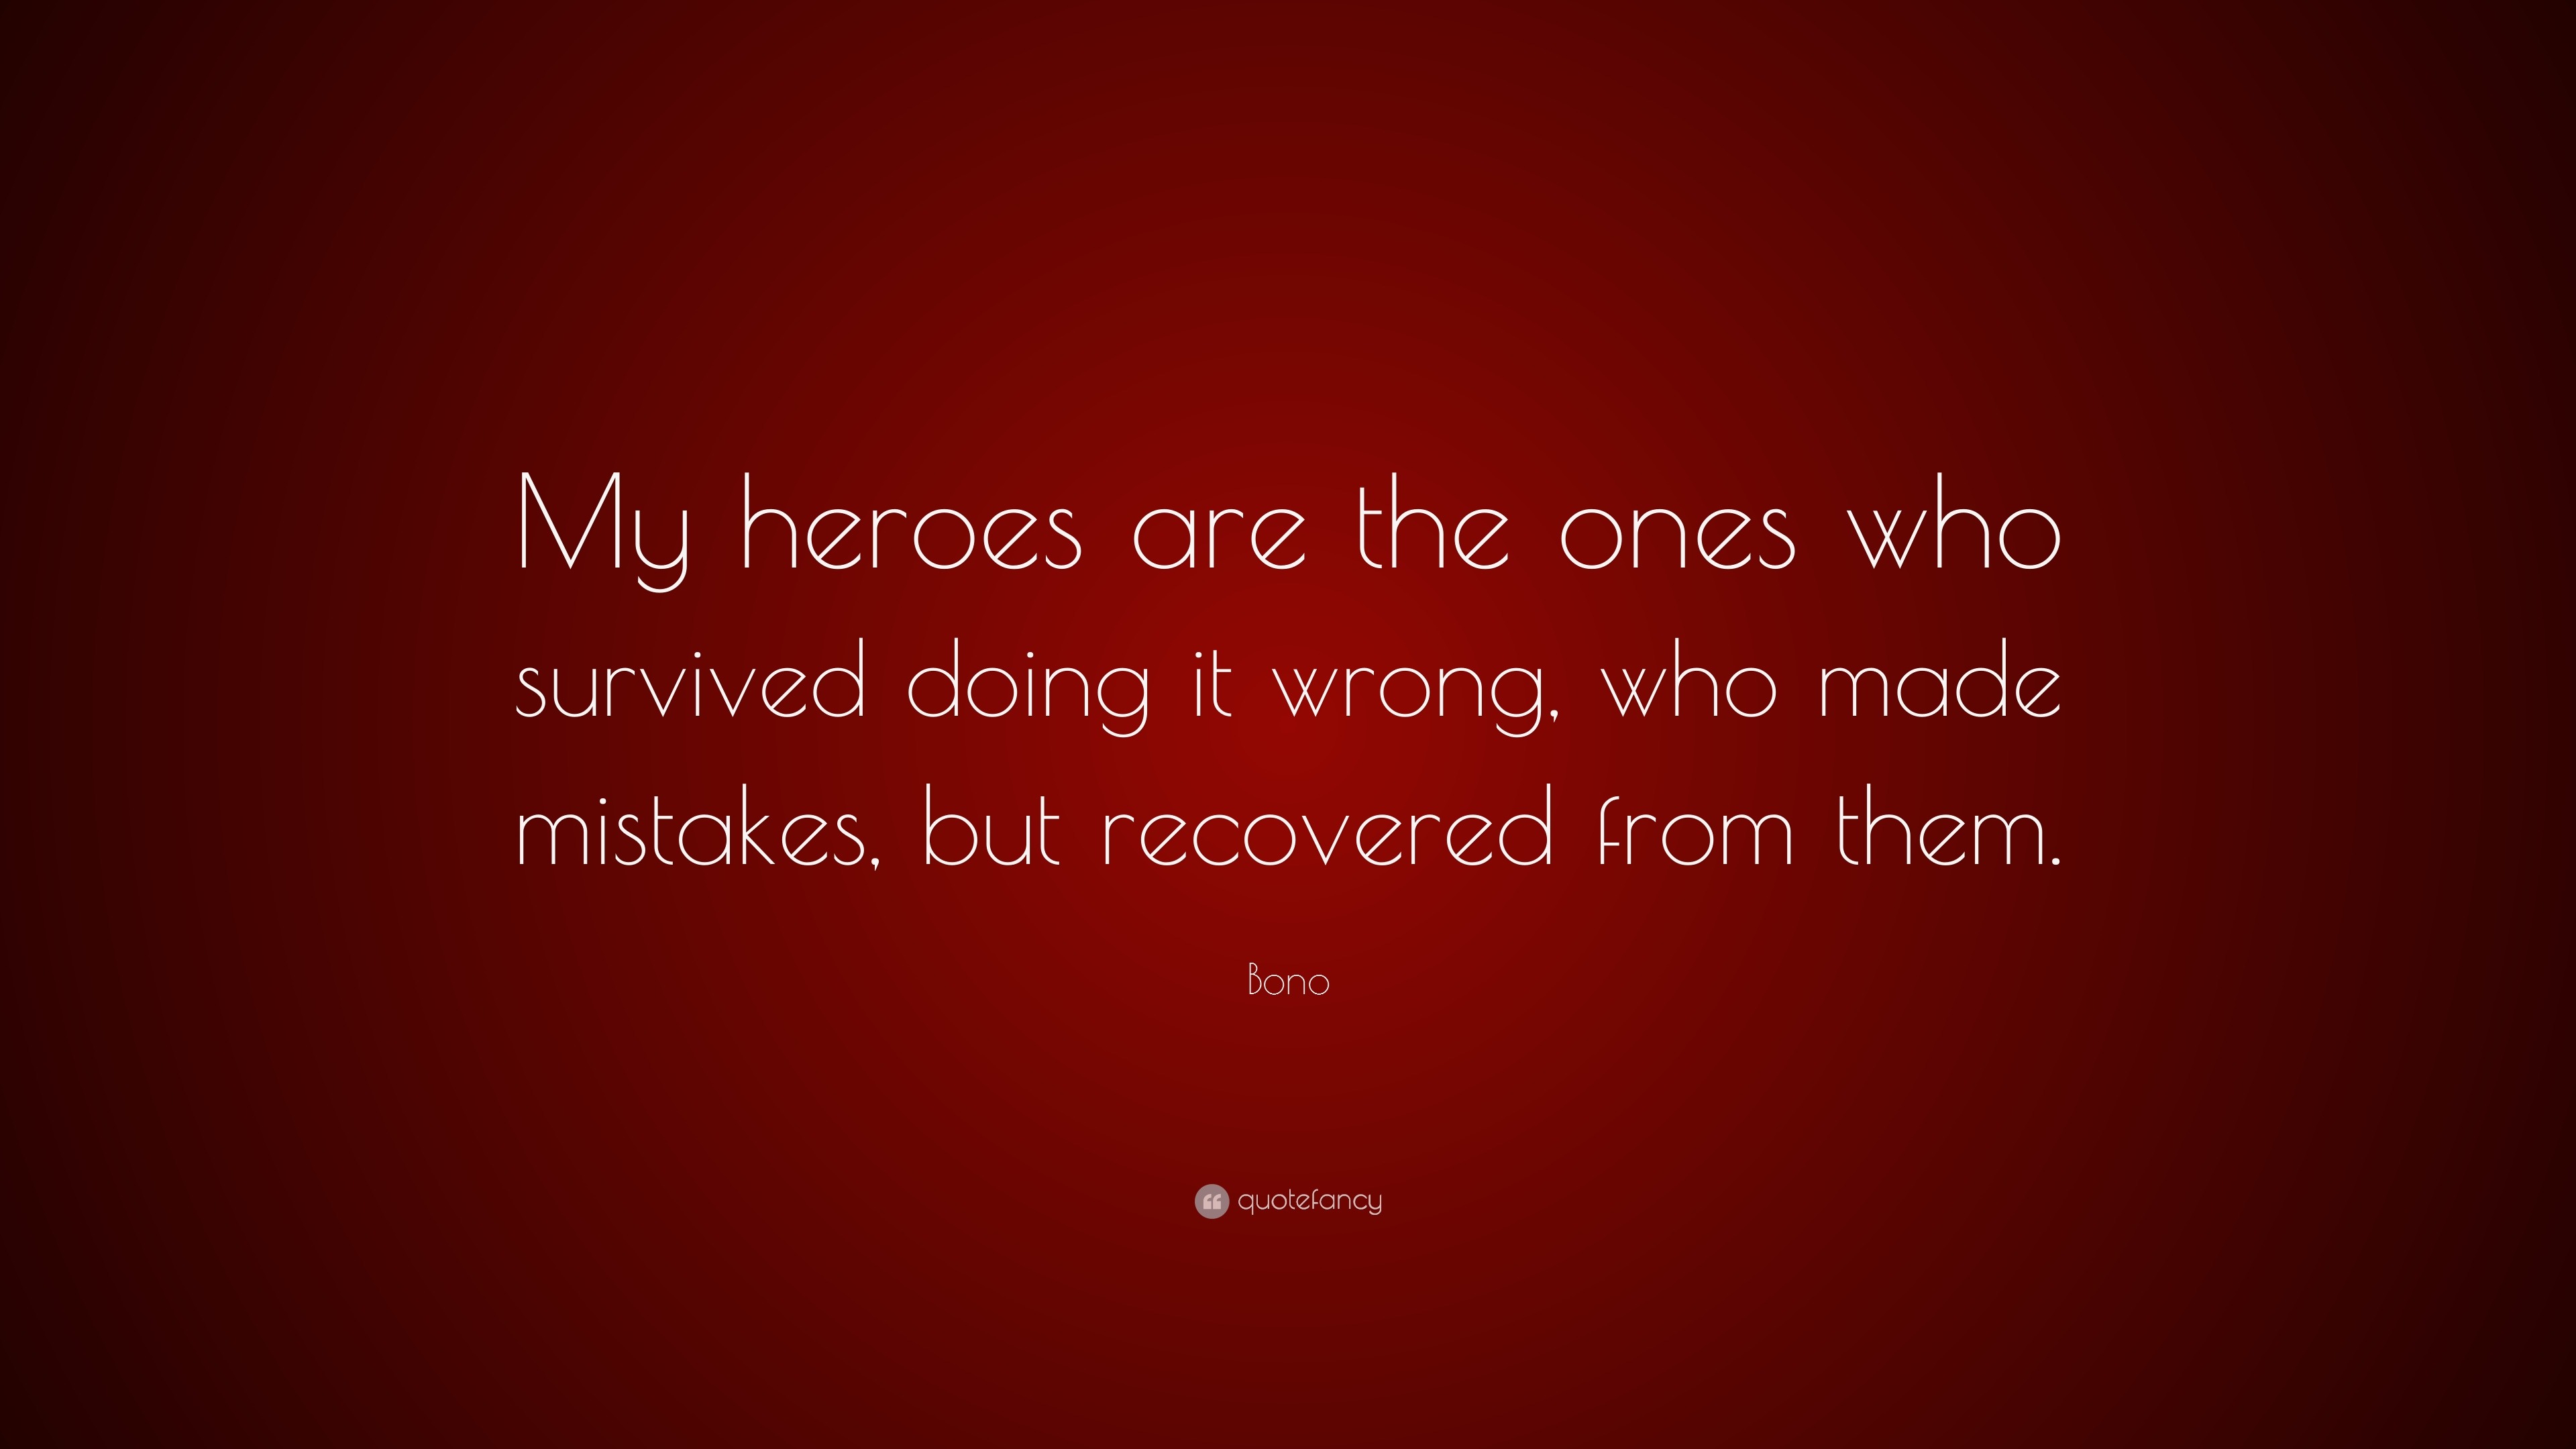 Bono Quote: “My heroes are the ones who survived doing it wrong, who ...